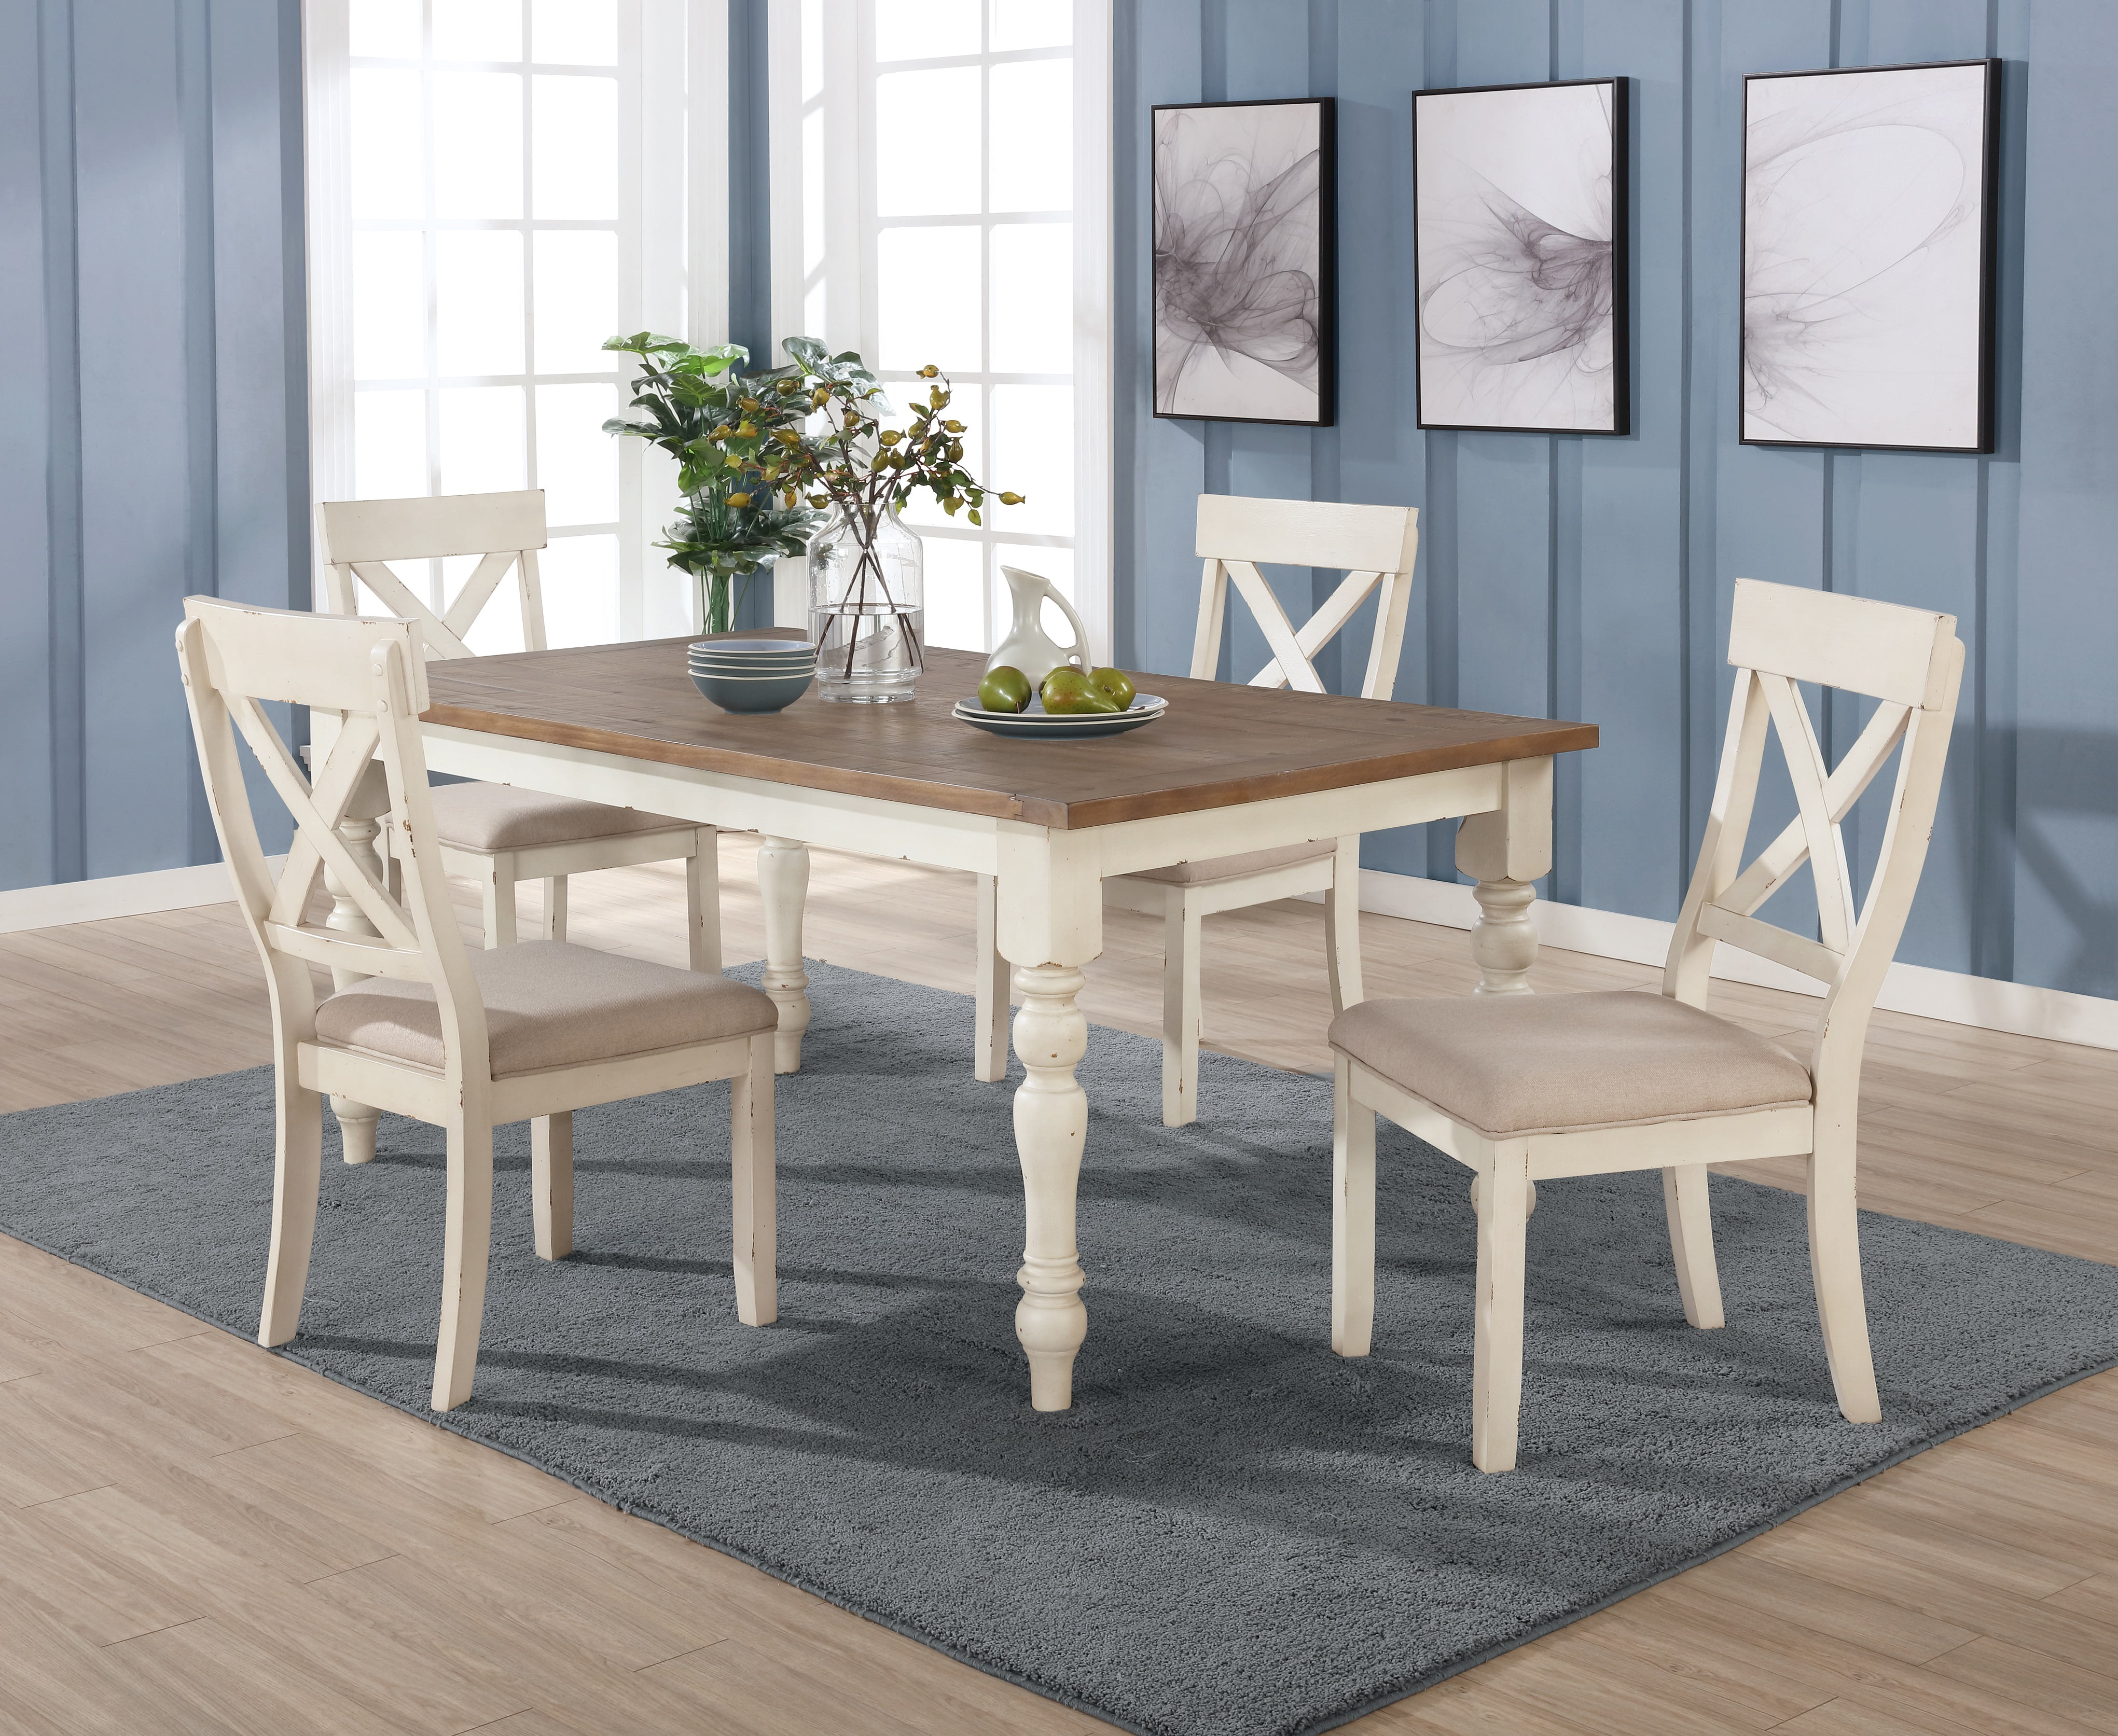 Roundhill Furniture Prato 5-piece Dining Table Set With Cross Back